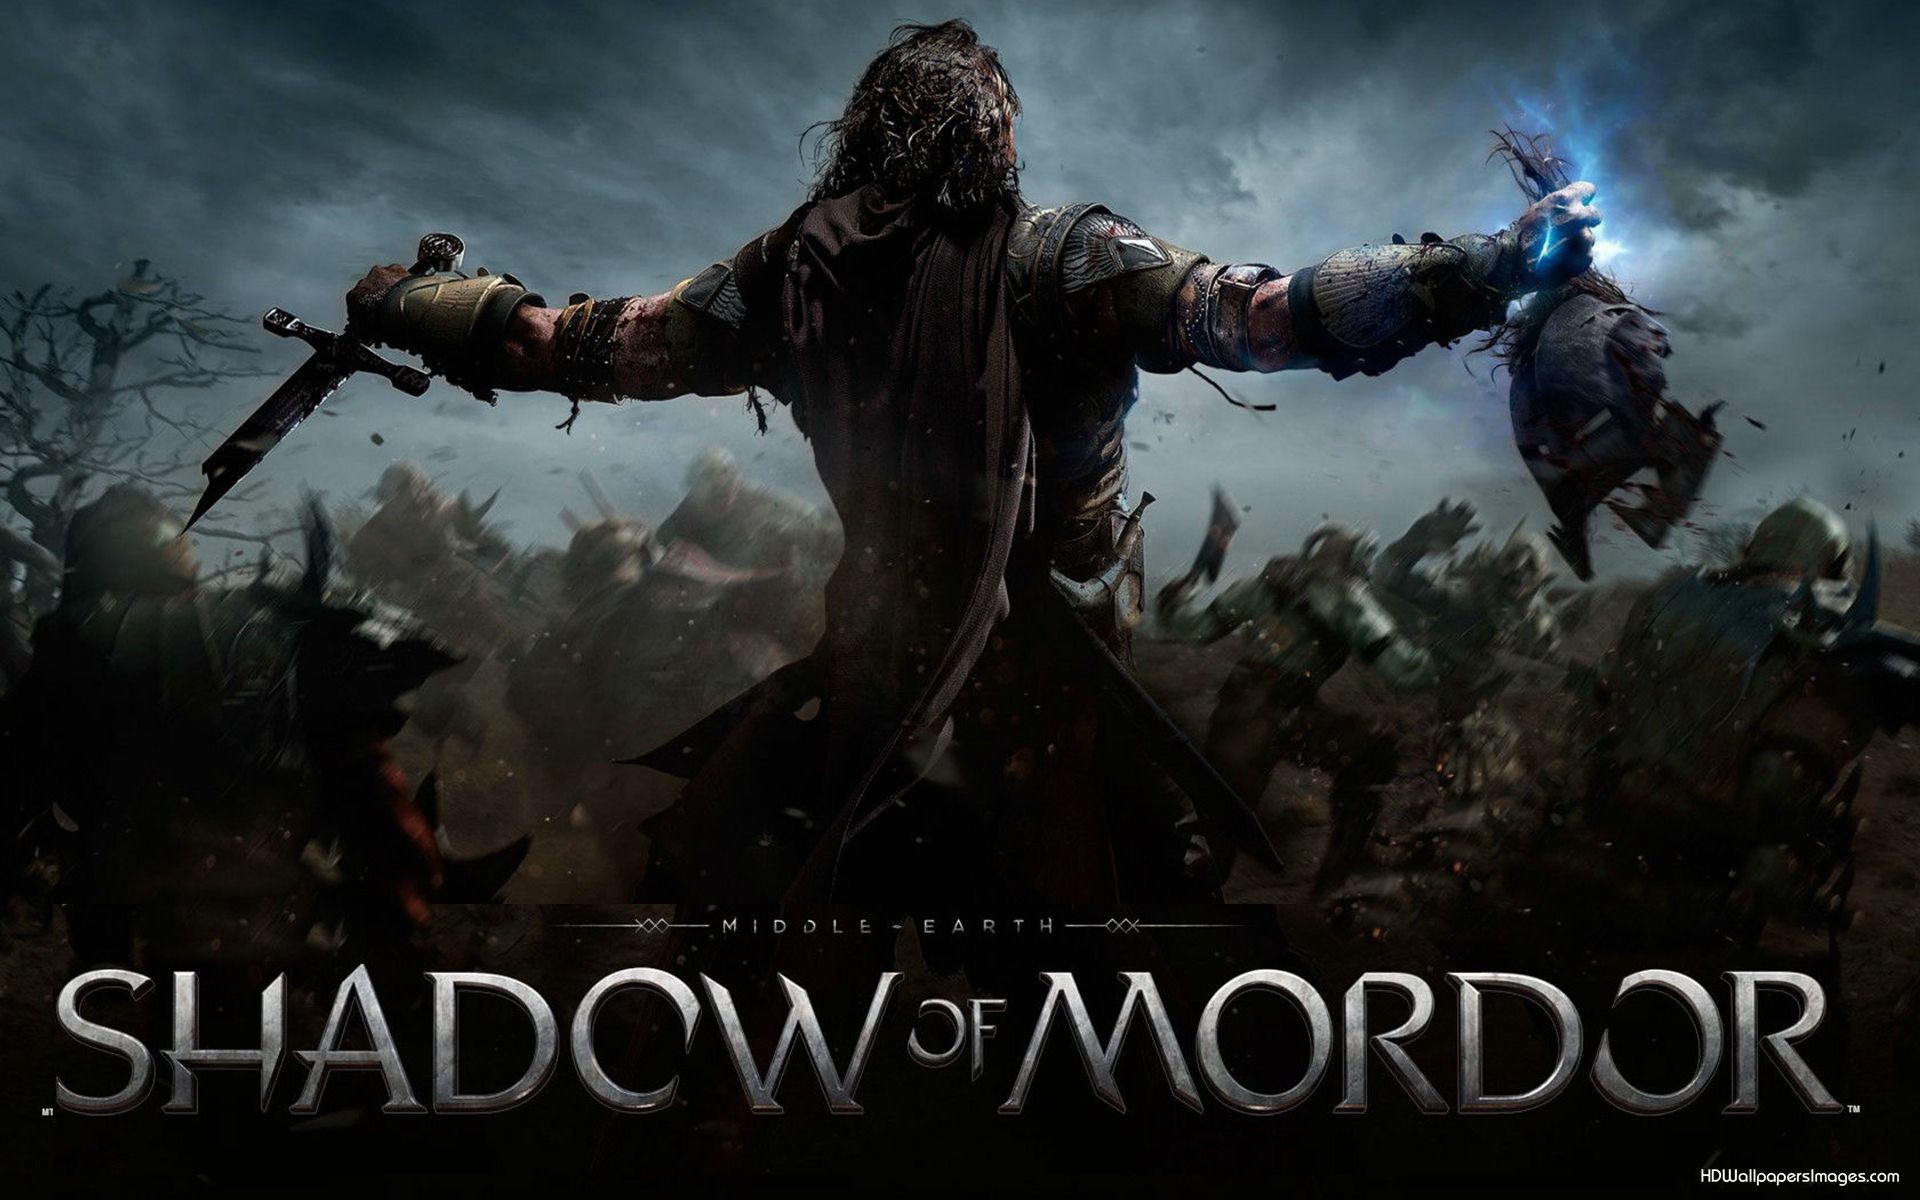 Middle-earth: Shadow of Mordor 'Weapons and Runes' gameplay - Gematsu